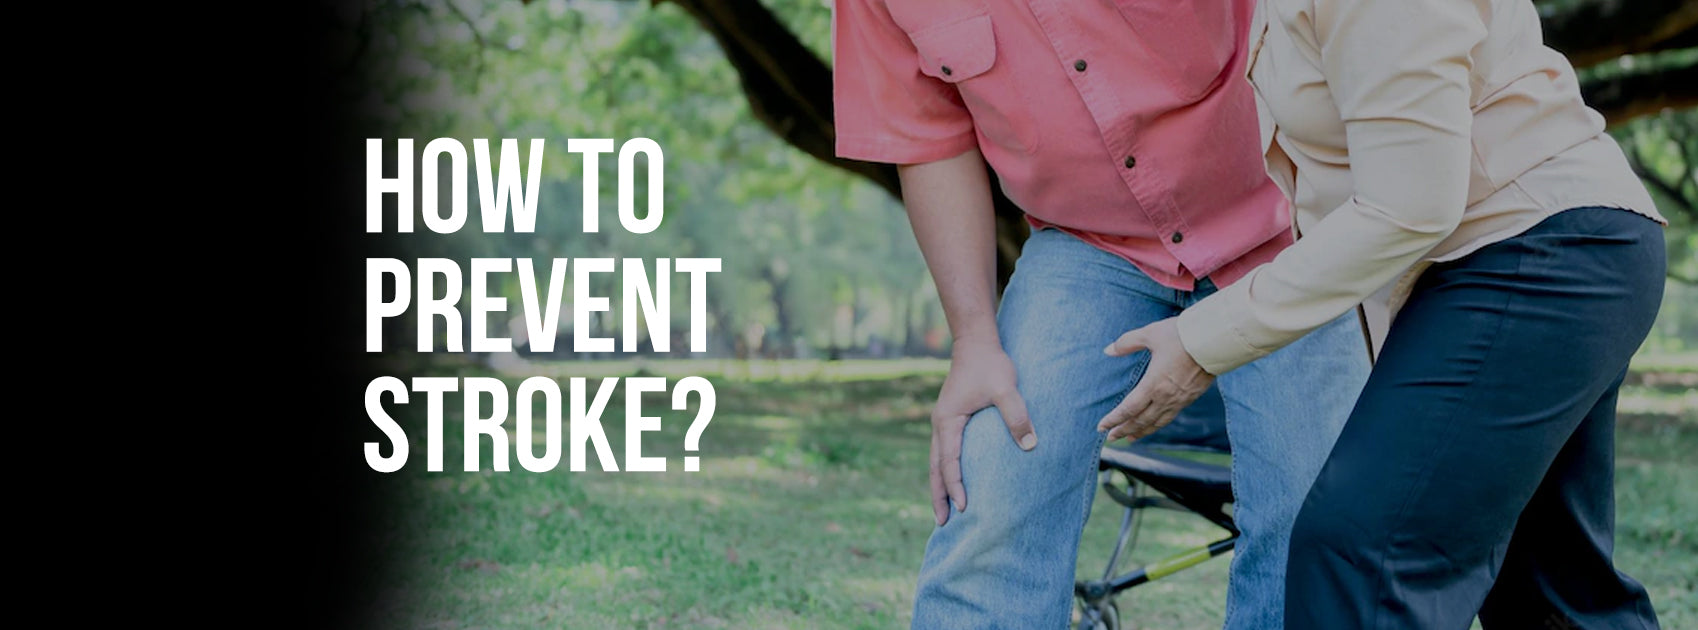 WHAT IS STROKE & HOW TO PREVENT STROKE FROM EVER HAPPENING?